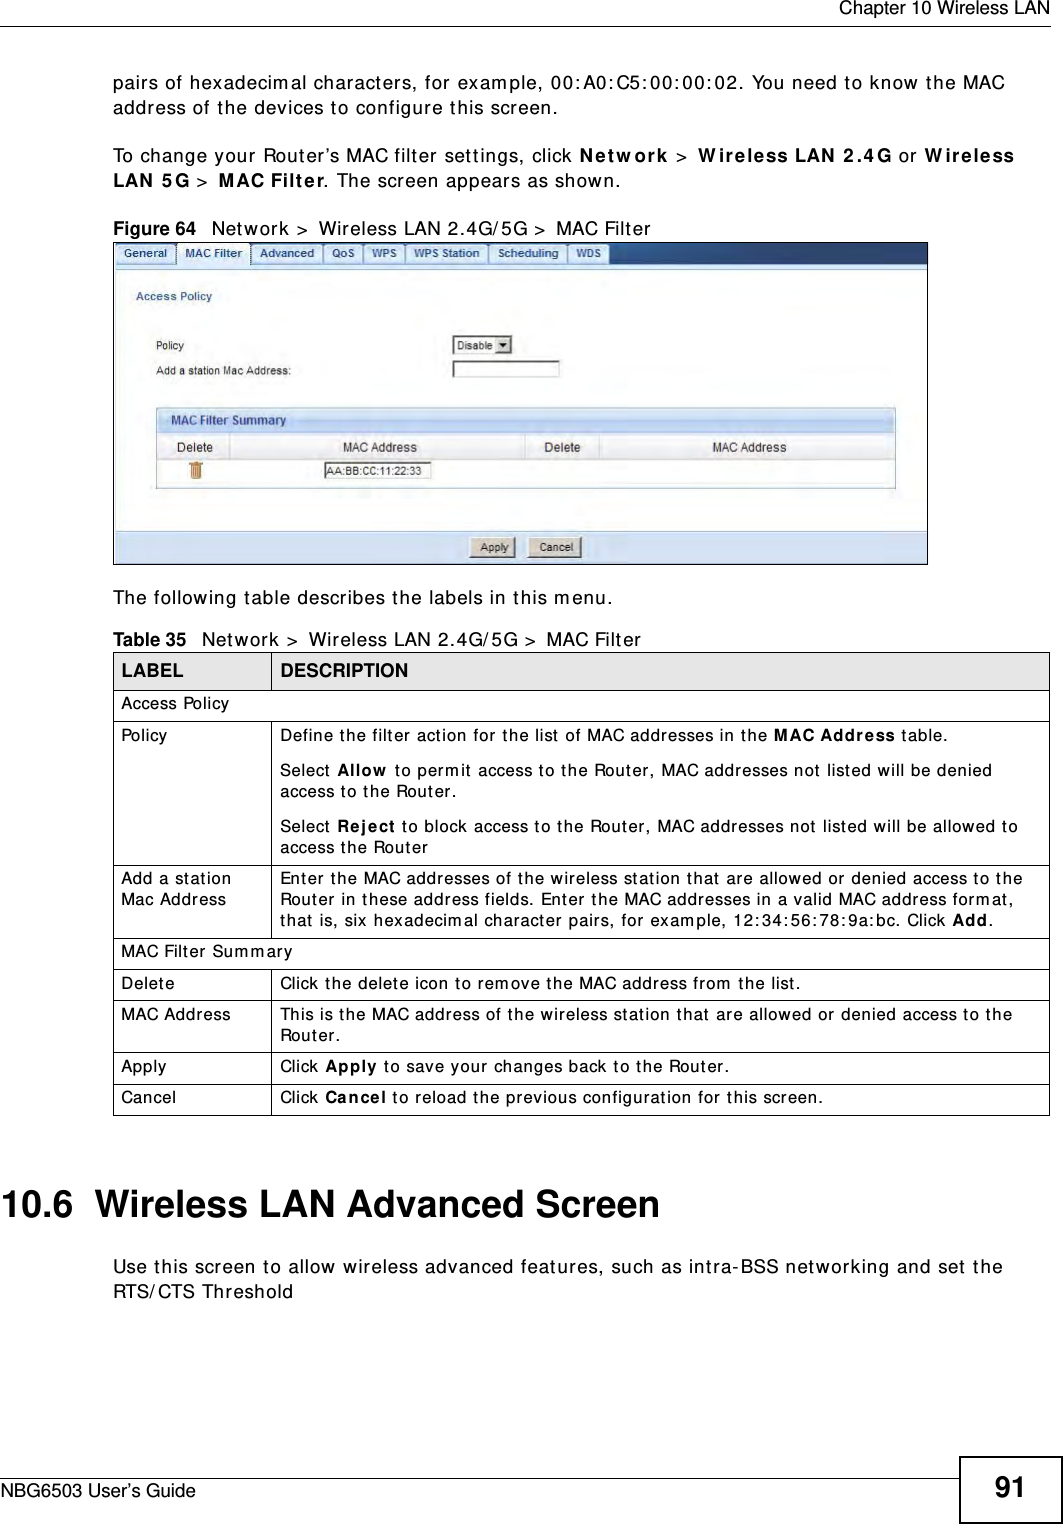  Chapter 10 Wireless LANNBG6503 User’s Guide 91pairs of hexadecimal characters, for example, 00:A0:C5:00:00:02. You need to know the MAC address of the devices to configure this screen.To change your Router’s MAC filter settings, click Network &gt; Wireless LAN 2.4G or Wireless LAN 5G &gt; MAC Filter. The screen appears as shown.Figure 64   Network &gt; Wireless LAN 2.4G/5G &gt; MAC FilterThe following table describes the labels in this menu.10.6  Wireless LAN Advanced ScreenUse this screen to allow wireless advanced features, such as intra-BSS networking and set the  RTS/CTS ThresholdTable 35   Network &gt; Wireless LAN 2.4G/5G &gt; MAC FilterLABEL DESCRIPTIONAccess PolicyPolicy  Define the filter action for the list of MAC addresses in the MAC Address table. Select Allow to permit access to the Router, MAC addresses not listed will be denied access to the Router. Select Reject to block access to the Router, MAC addresses not listed will be allowed to access the Router Add a station Mac Address Enter the MAC addresses of the wireless station that are allowed or denied access to the Router in these address fields. Enter the MAC addresses in a valid MAC address format, that is, six hexadecimal character pairs, for example, 12:34:56:78:9a:bc. Click Add.MAC Filter SummaryDelete Click the delete icon to remove the MAC address from the list.MAC Address This is the MAC address of the wireless station that are allowed or denied access to the Router.Apply Click Apply to save your changes back to the Router.Cancel Click Cancel to reload the previous configuration for this screen.